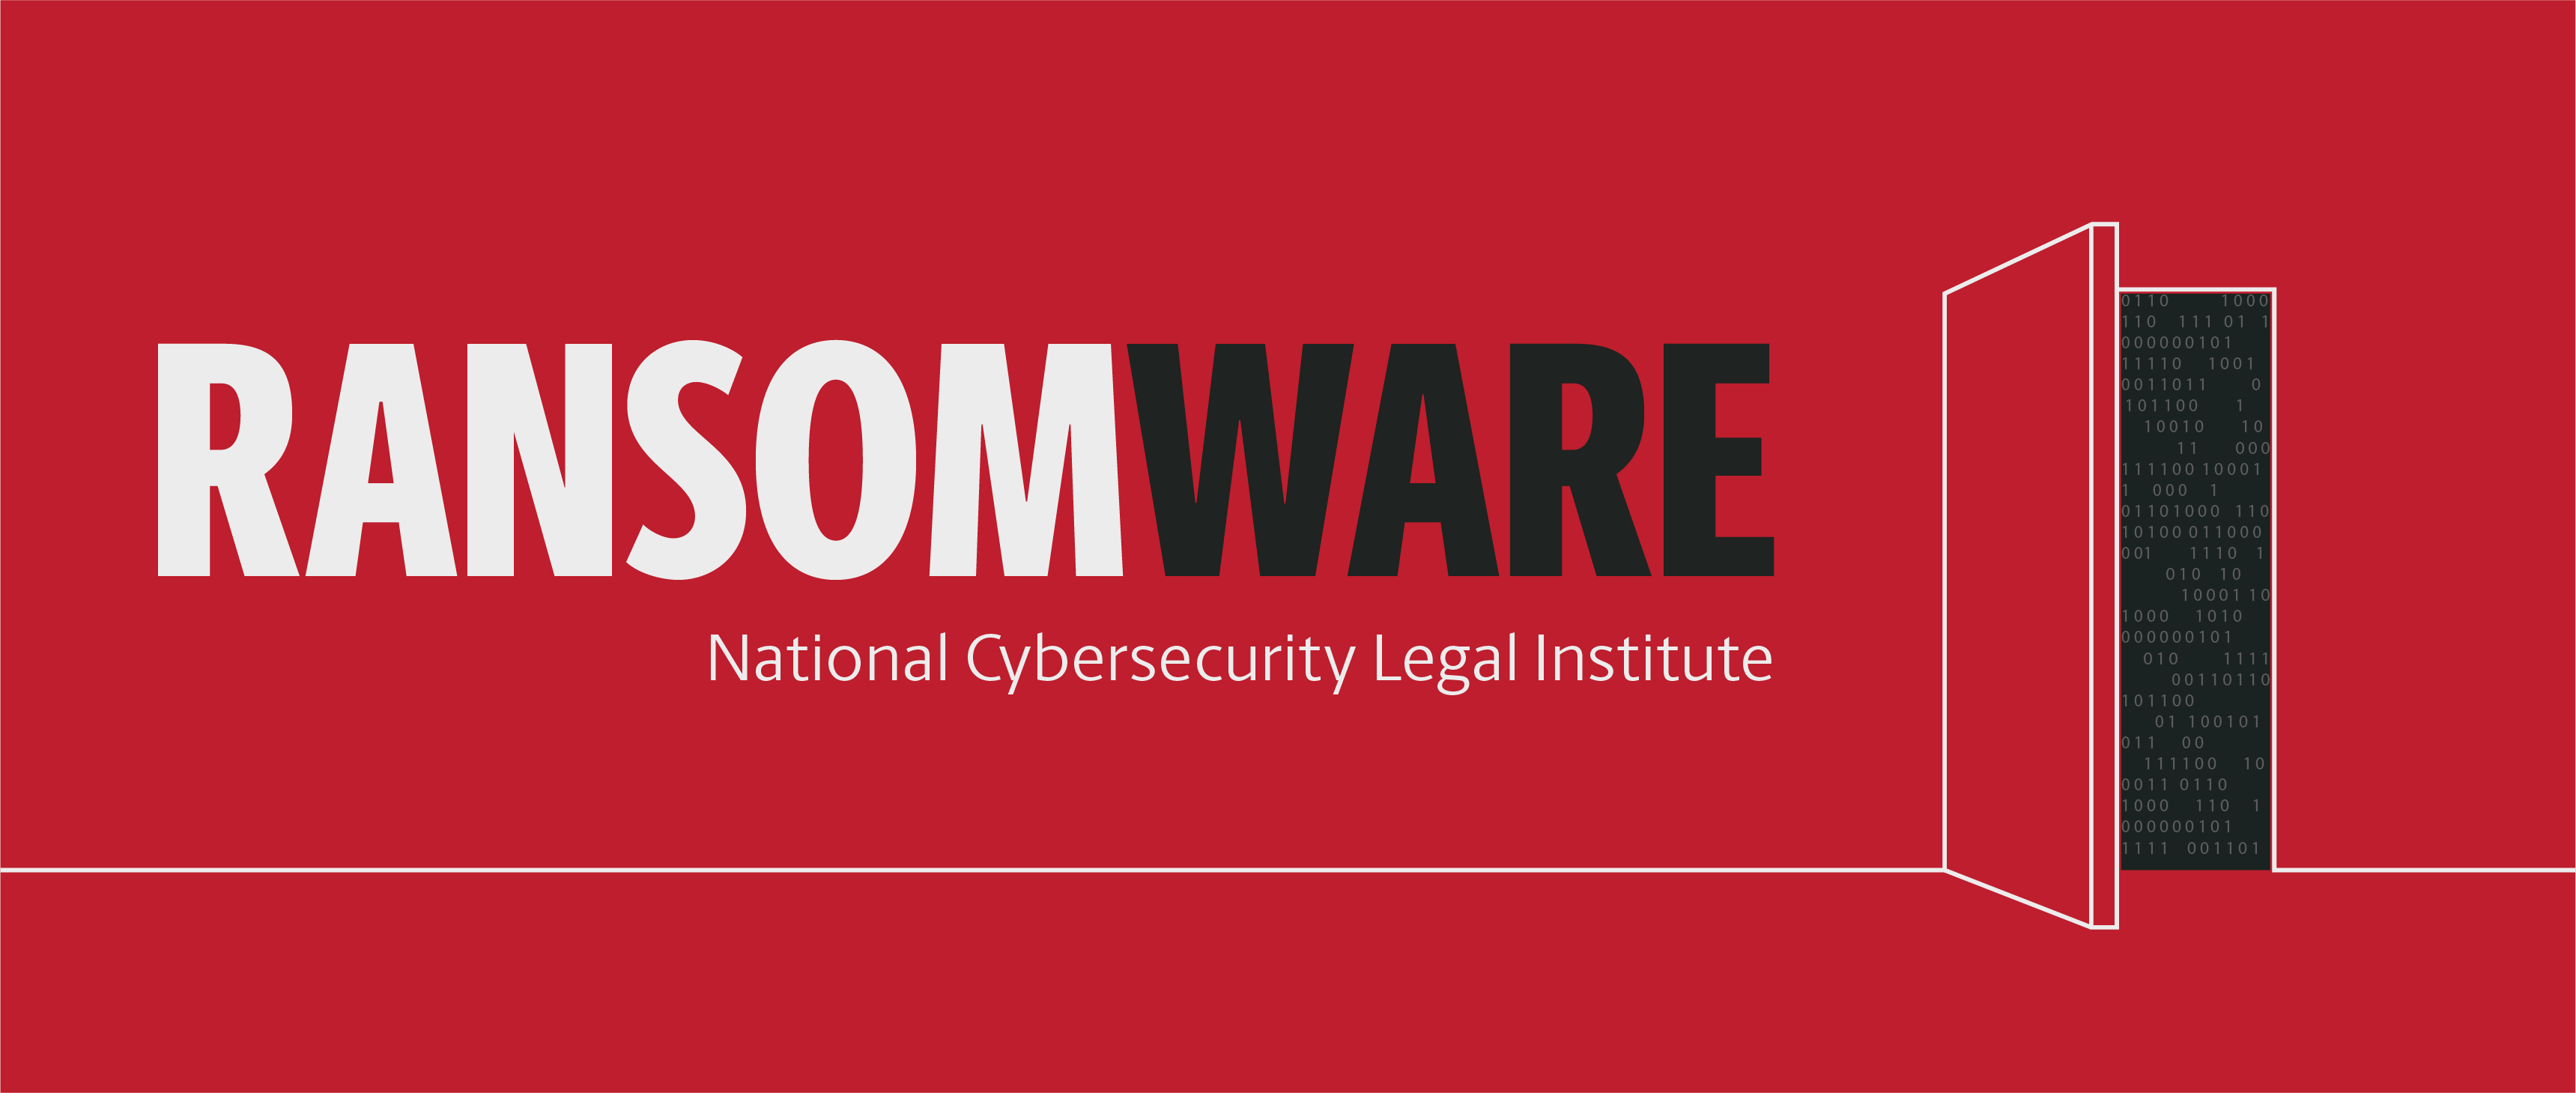 Ransomware: National Cybersecurity Legal Institute